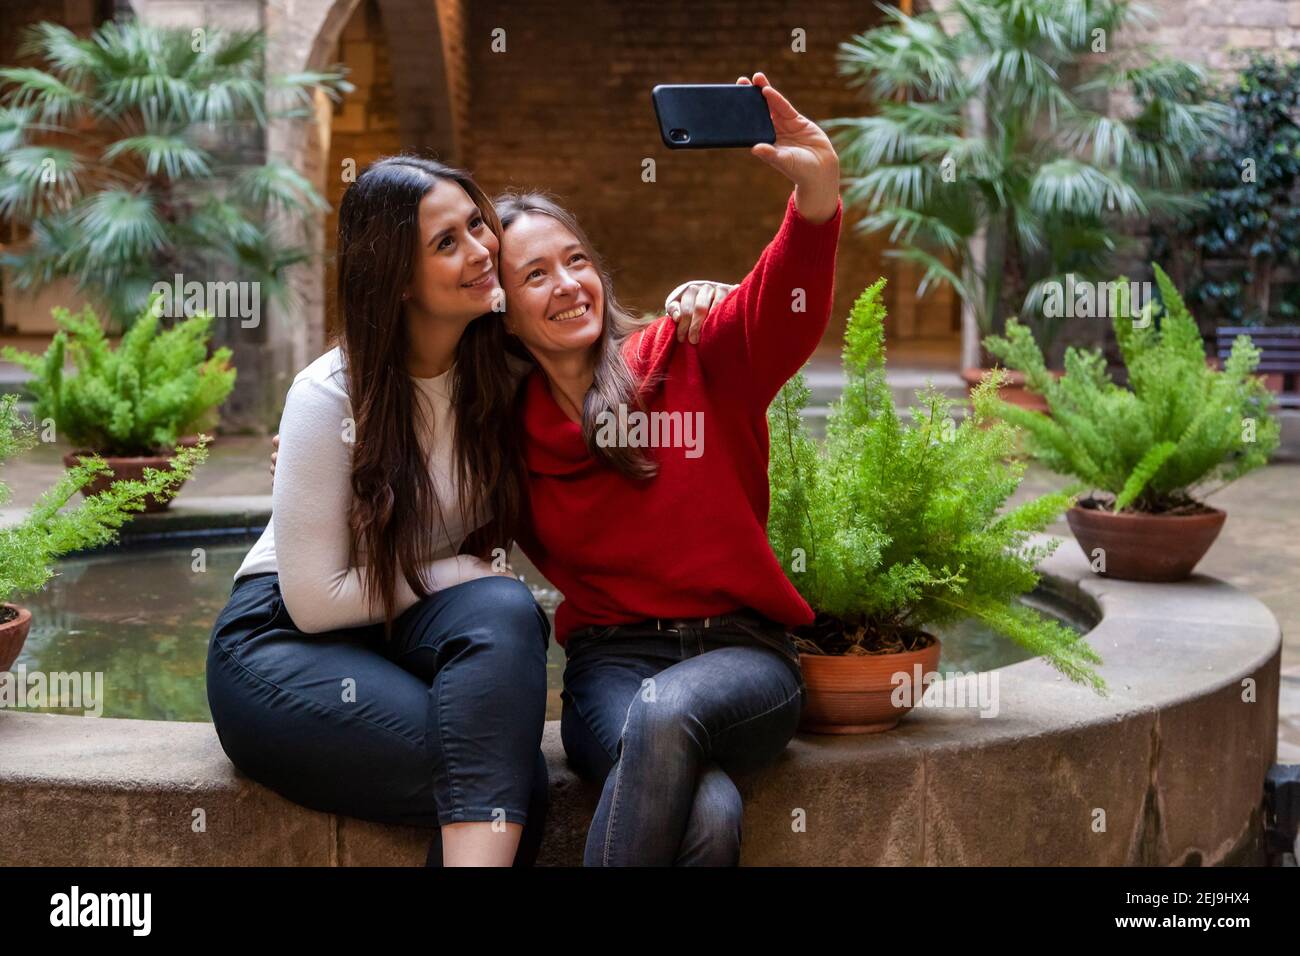 Two women friends capturing a selfie with a smart phone, smiling and sitting close together in urban environment Stock Photo